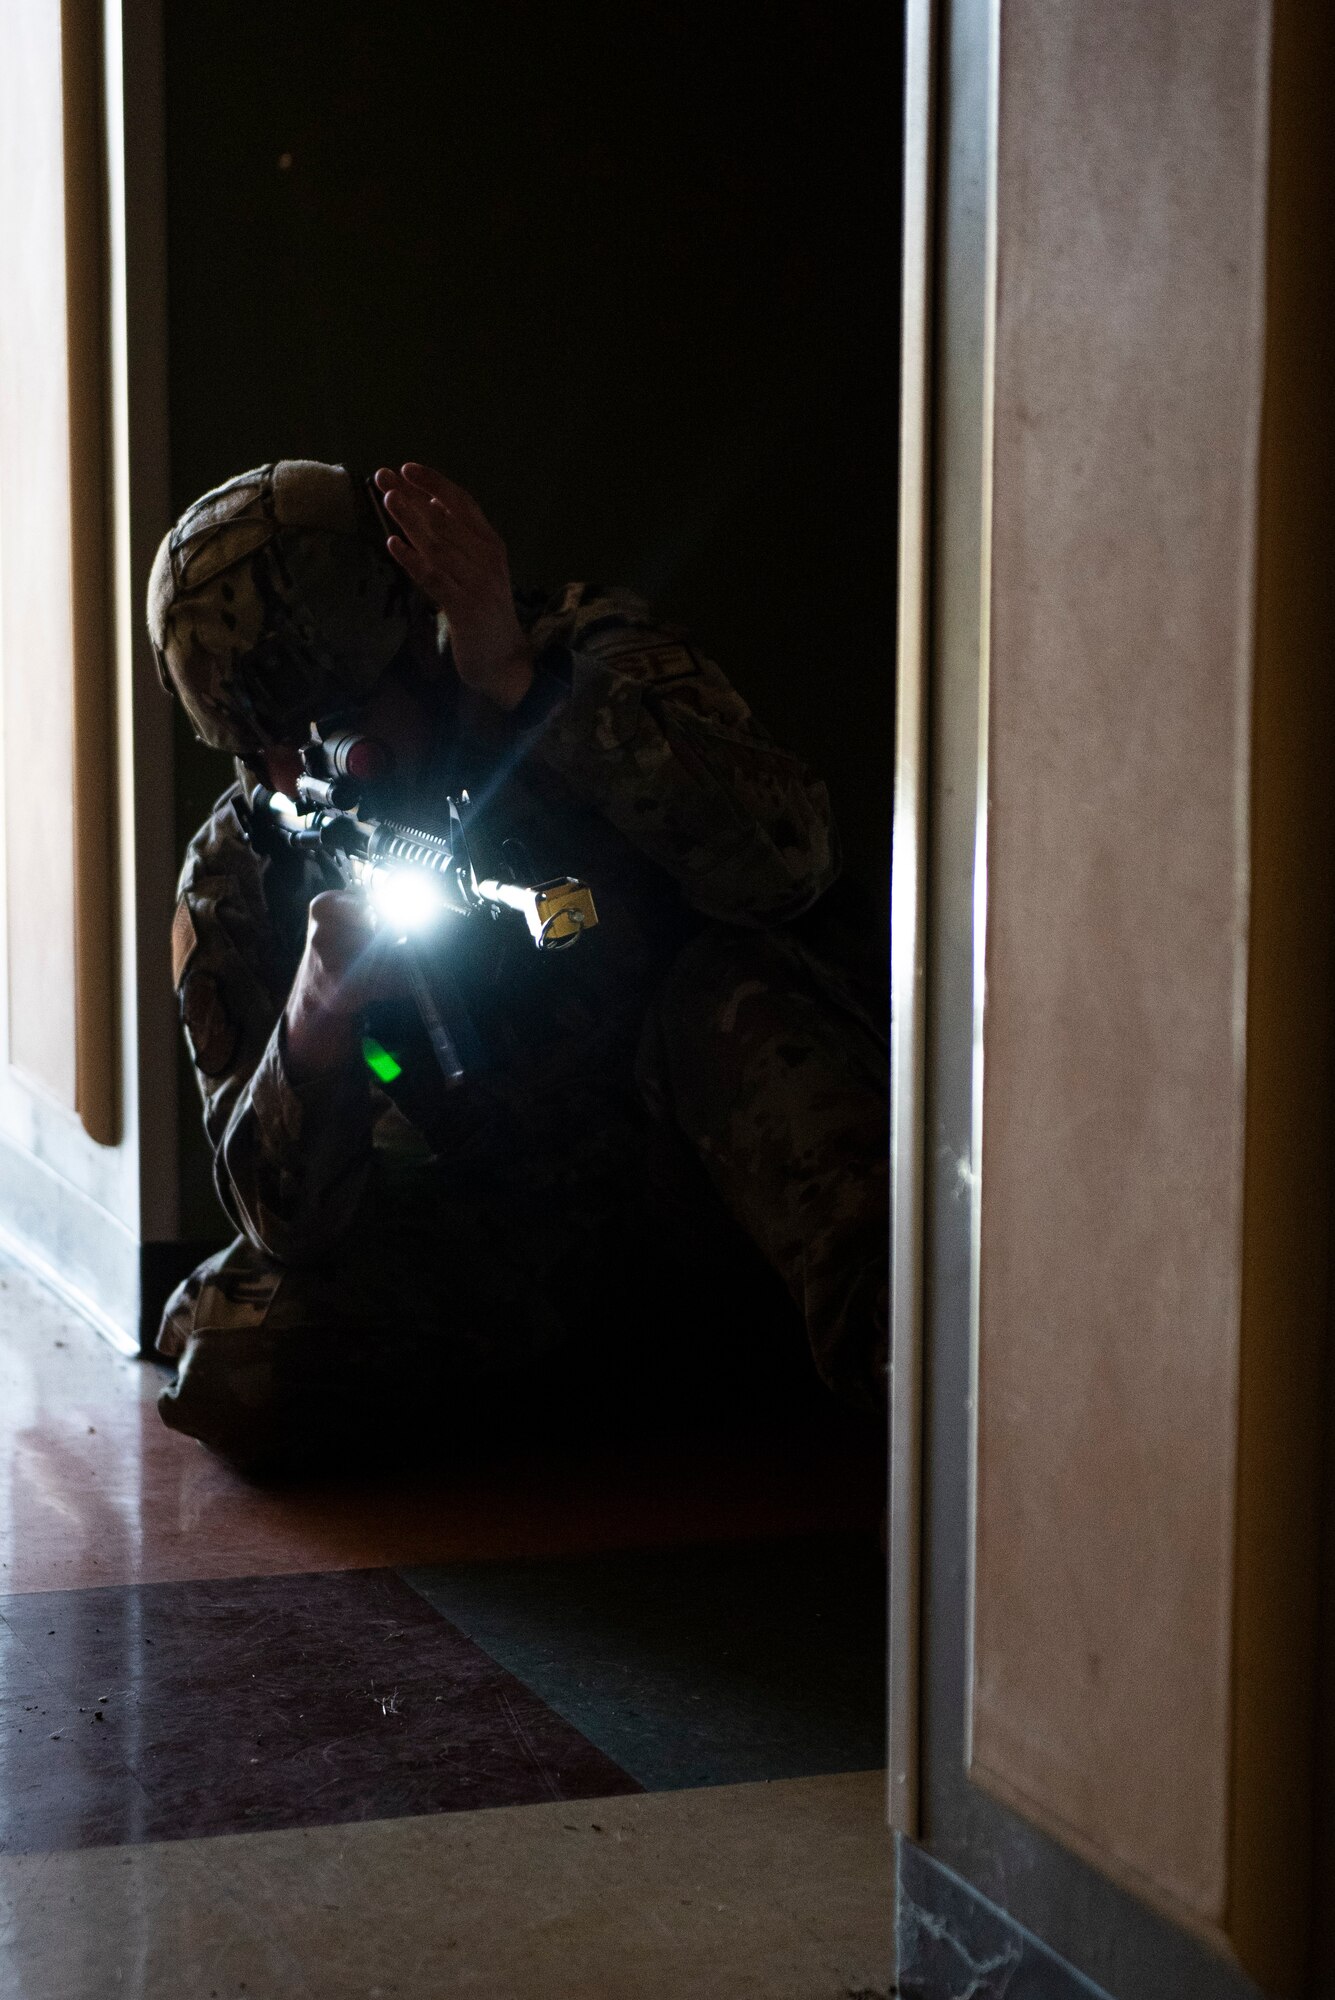 An 88th Security Forces Squadron secures one end of a cleared hallway during an active-shooter exercise, Aug. 18 at Wright-Patterson Air Force Base, Ohio. Readiness exercises are routinely held to streamline unit cohesion when responding to emergencies. (U.S. Air Force photo by Wesley Farnsworth)